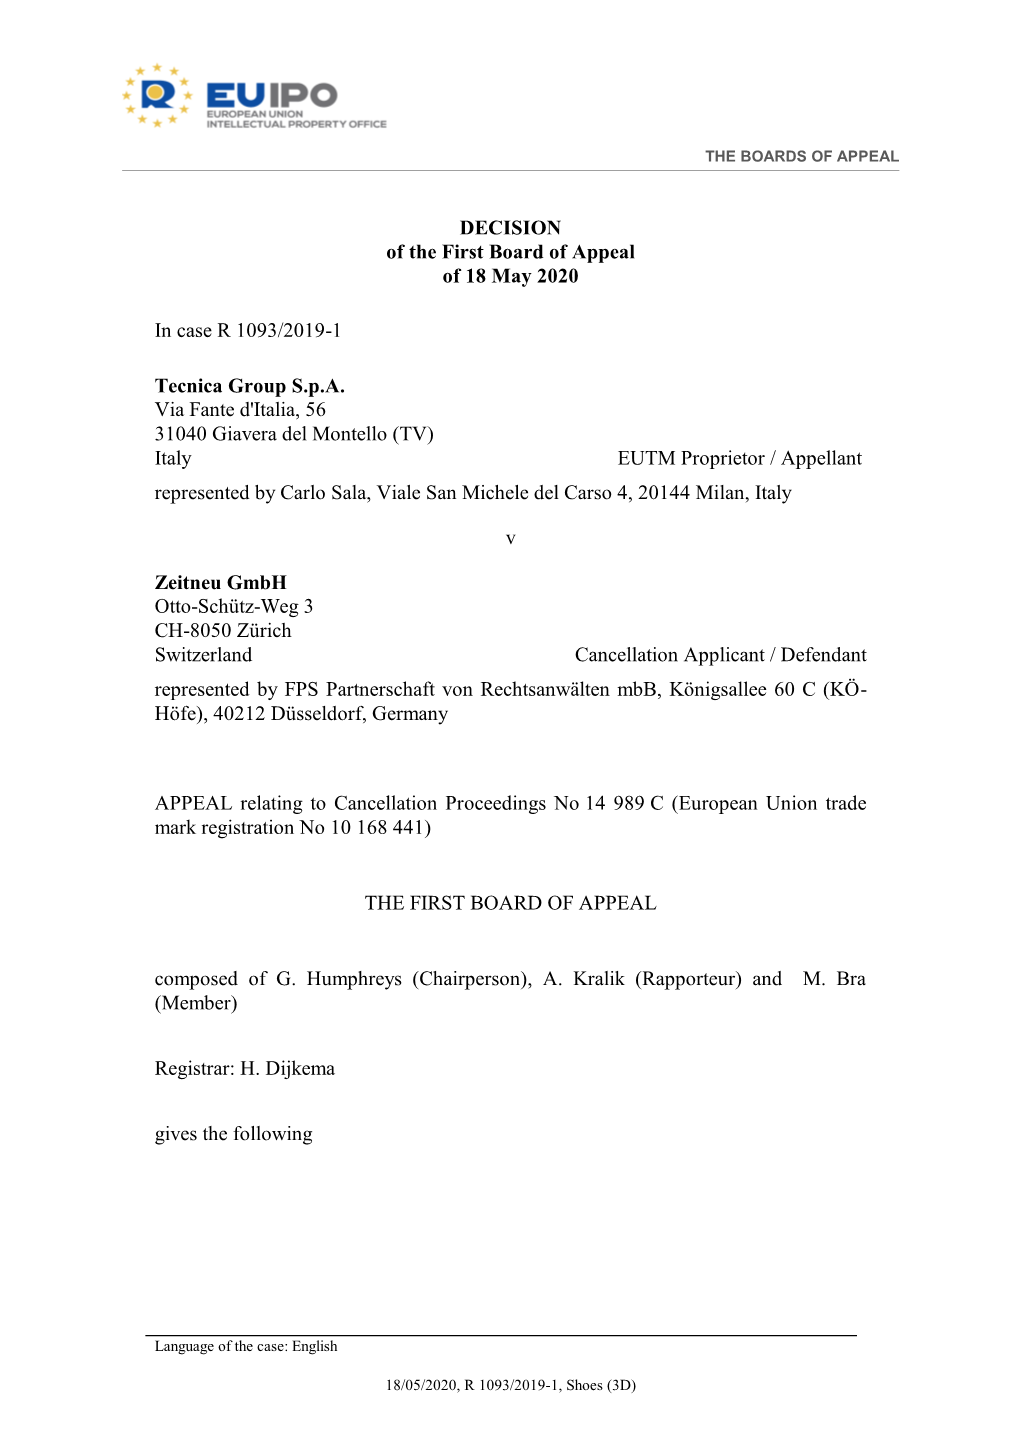 DECISION of the First Board of Appeal of 18 May 2020 in Case R 1093/2019-1 Tecnica Group S.P.A. Via Fante D'italia, 56 31040 Gi